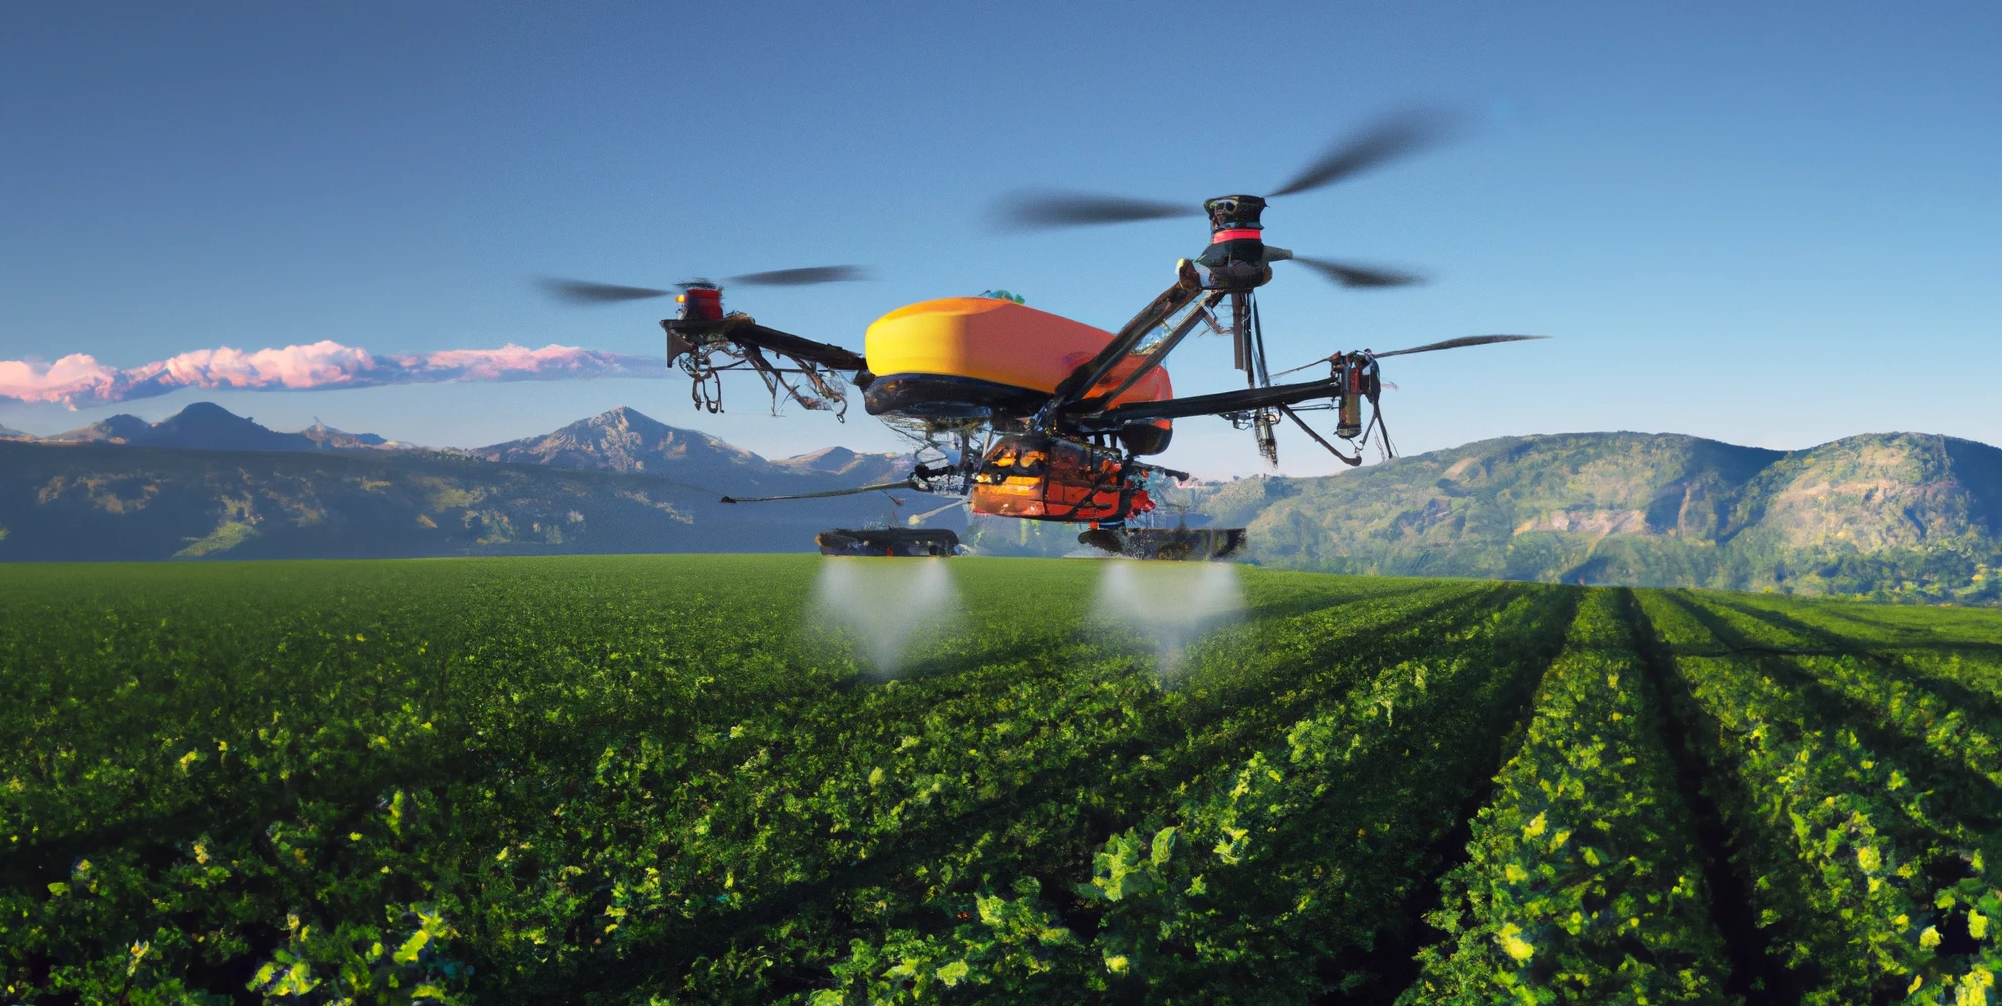 https://cleantechnica.com/wp-content/uploads/2023/03/DALL%C2%B7E-generated-image-of-a-very-large-multirotor-drone-spraying-fertilizer-on-lush-fields-on-a-sunny-day-digital-art.png